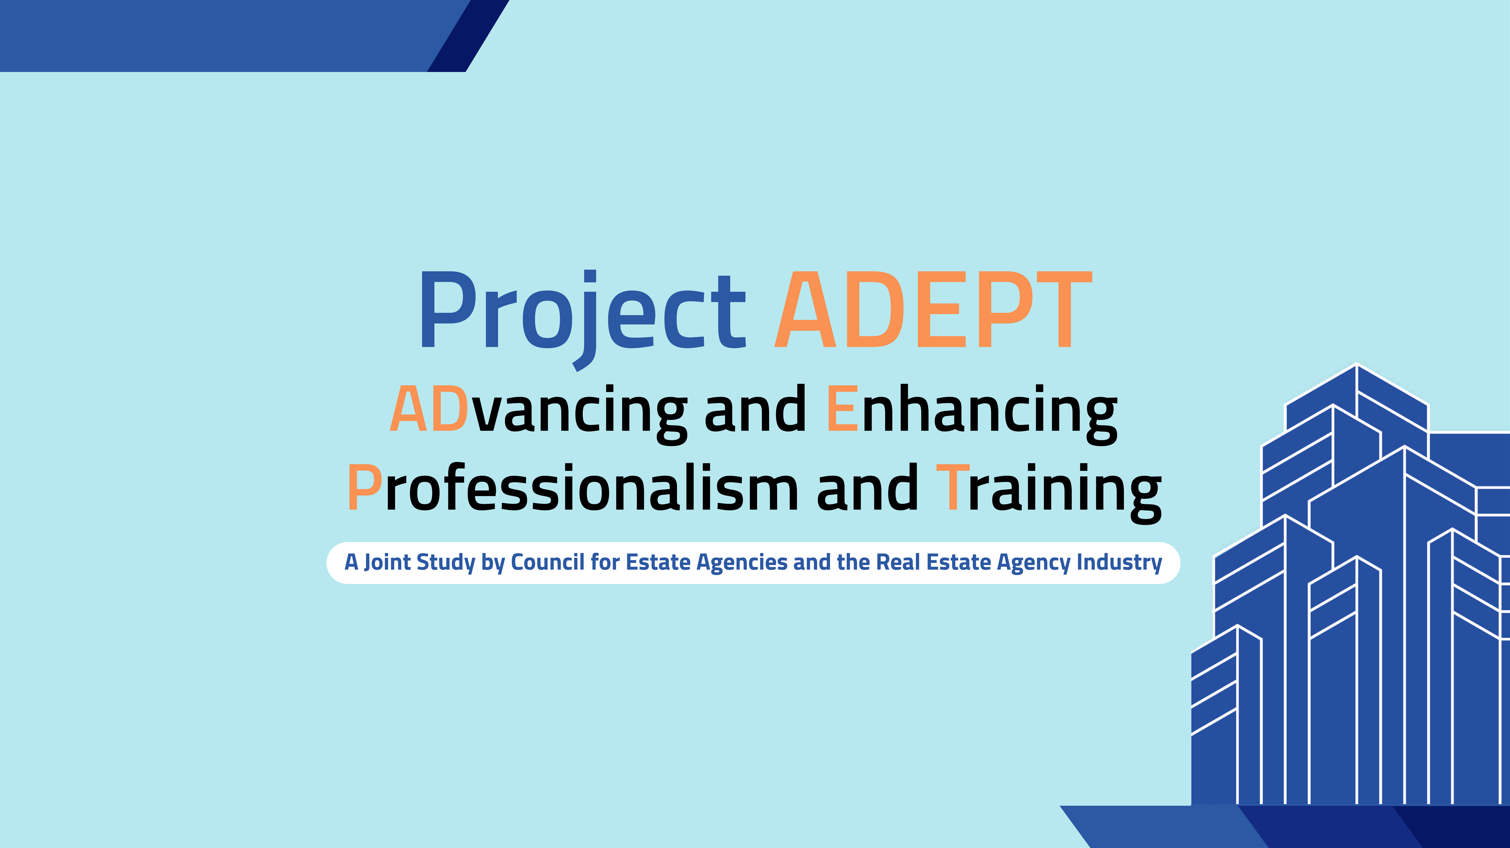 Project ADEPT (Advancing and Enhancing Professionalism and Training) 